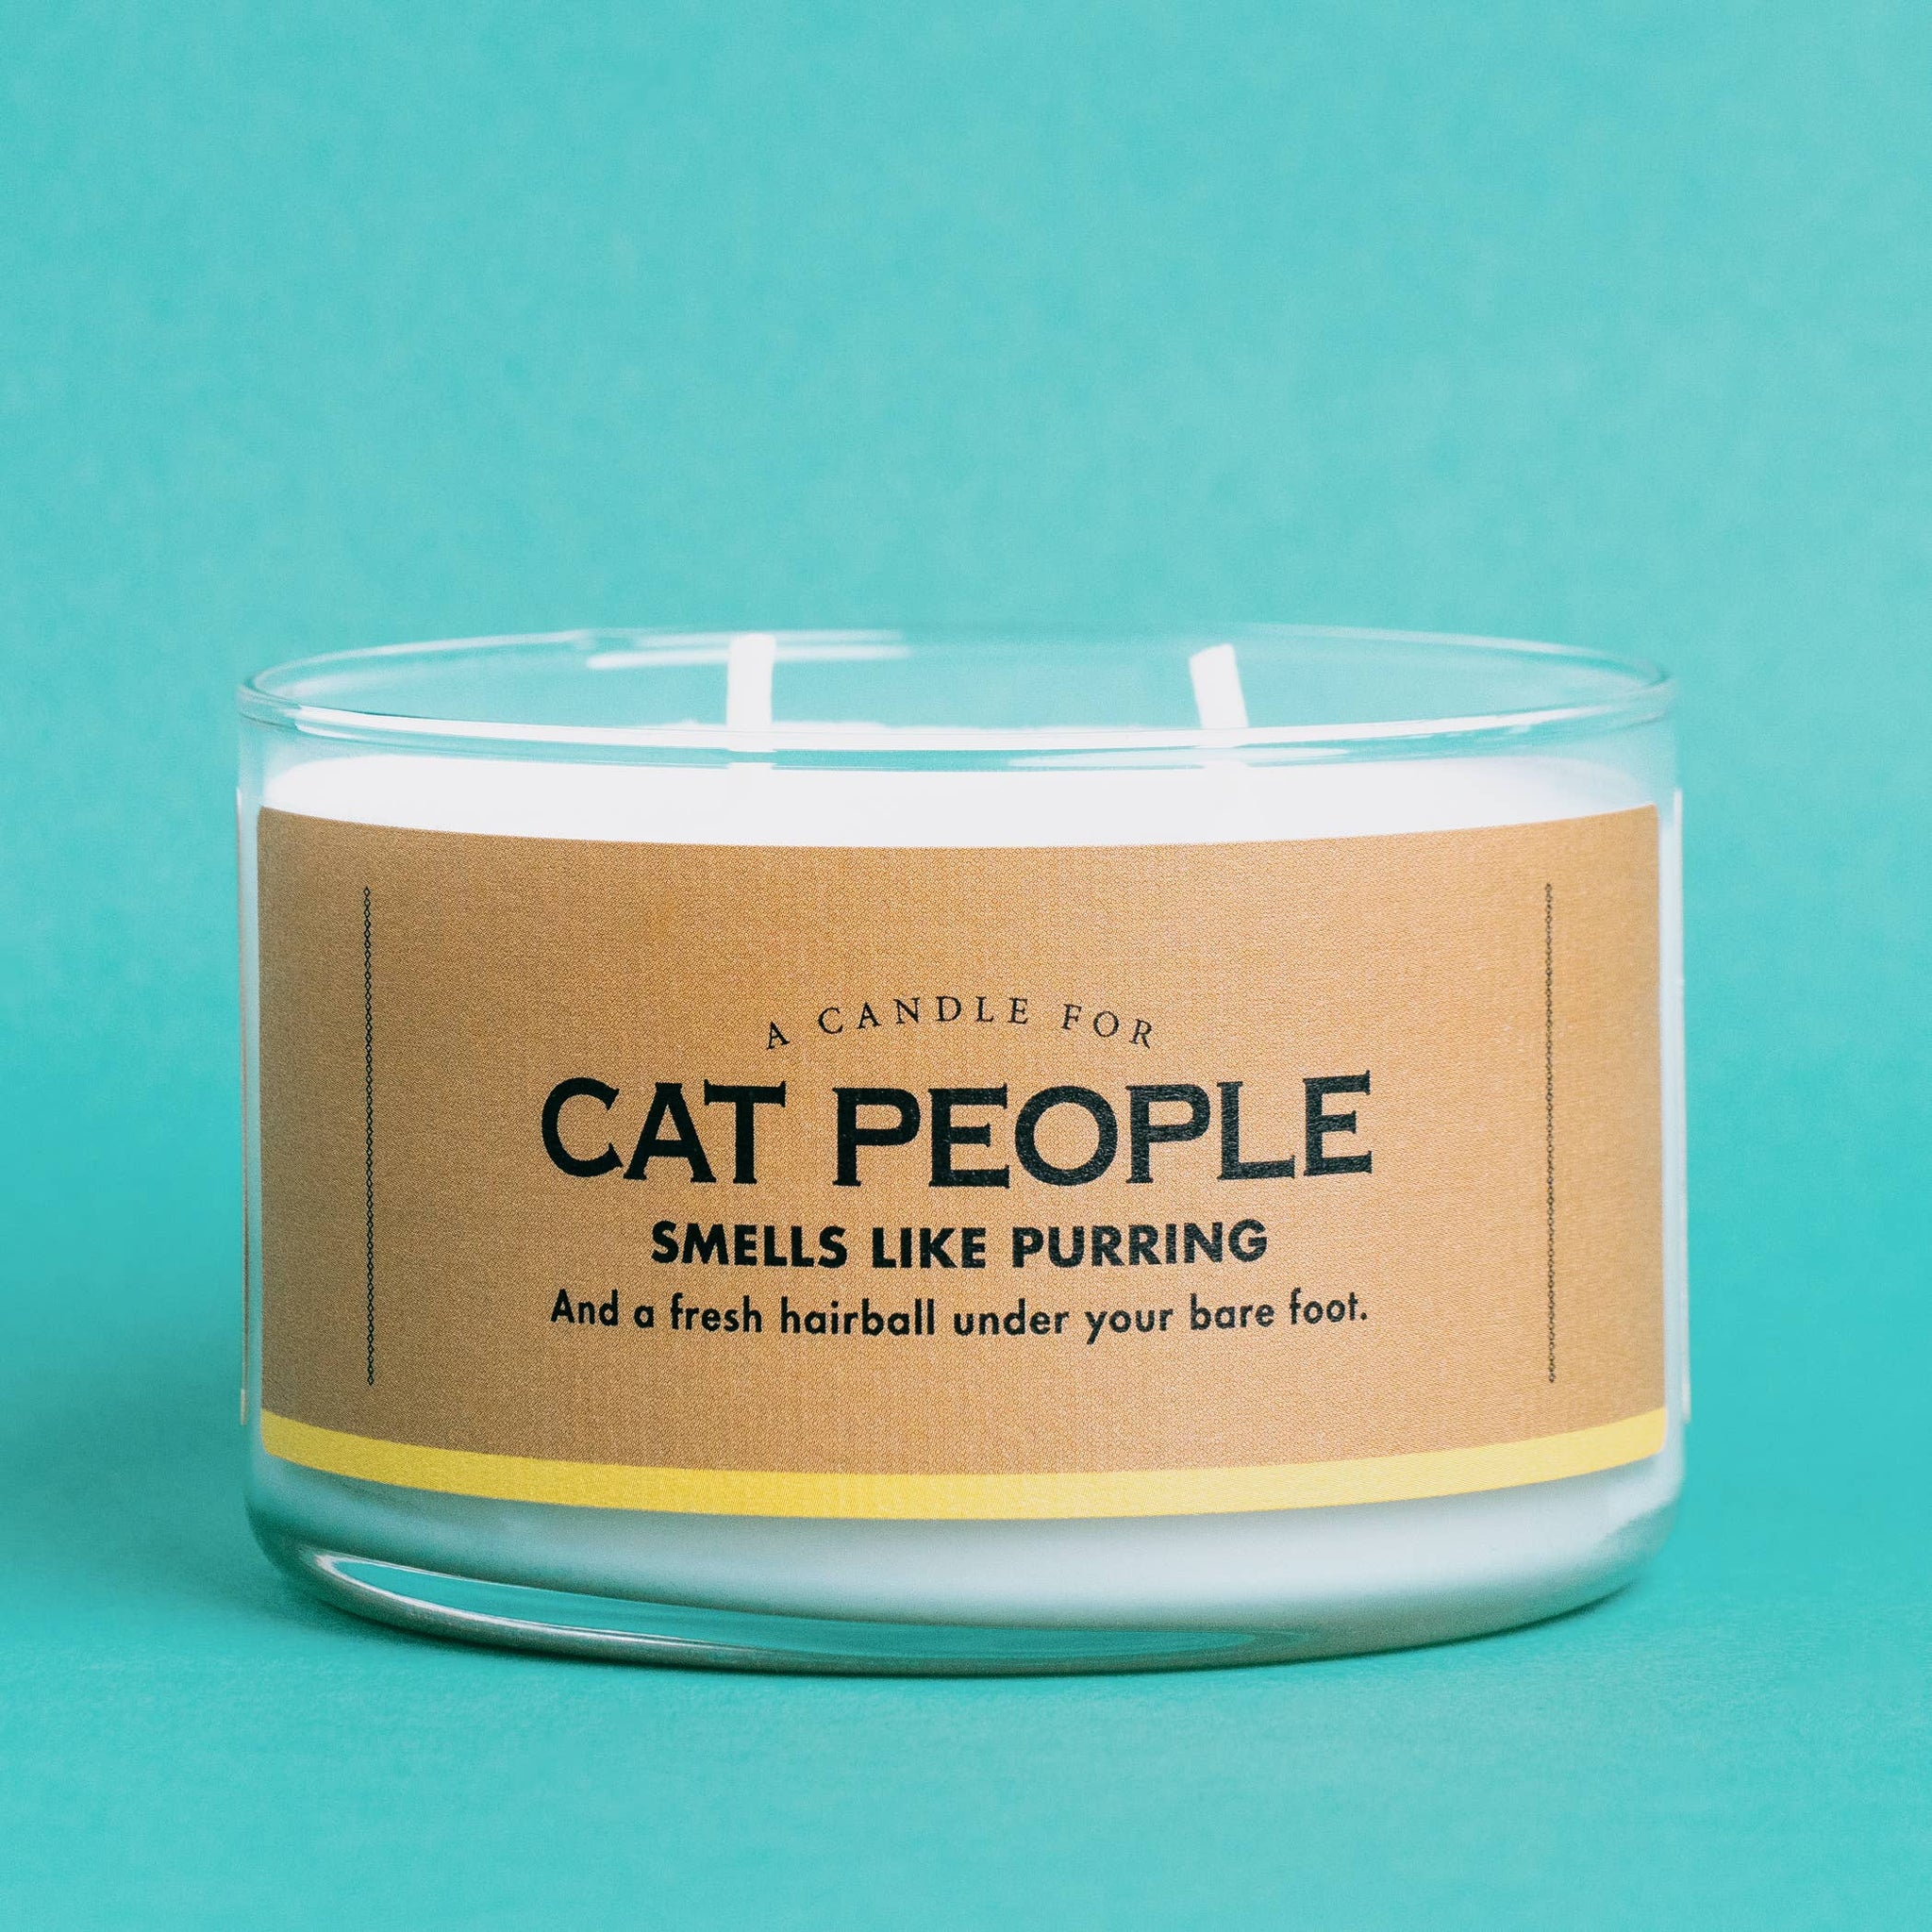 A Candle for Cat People | Funny Candle